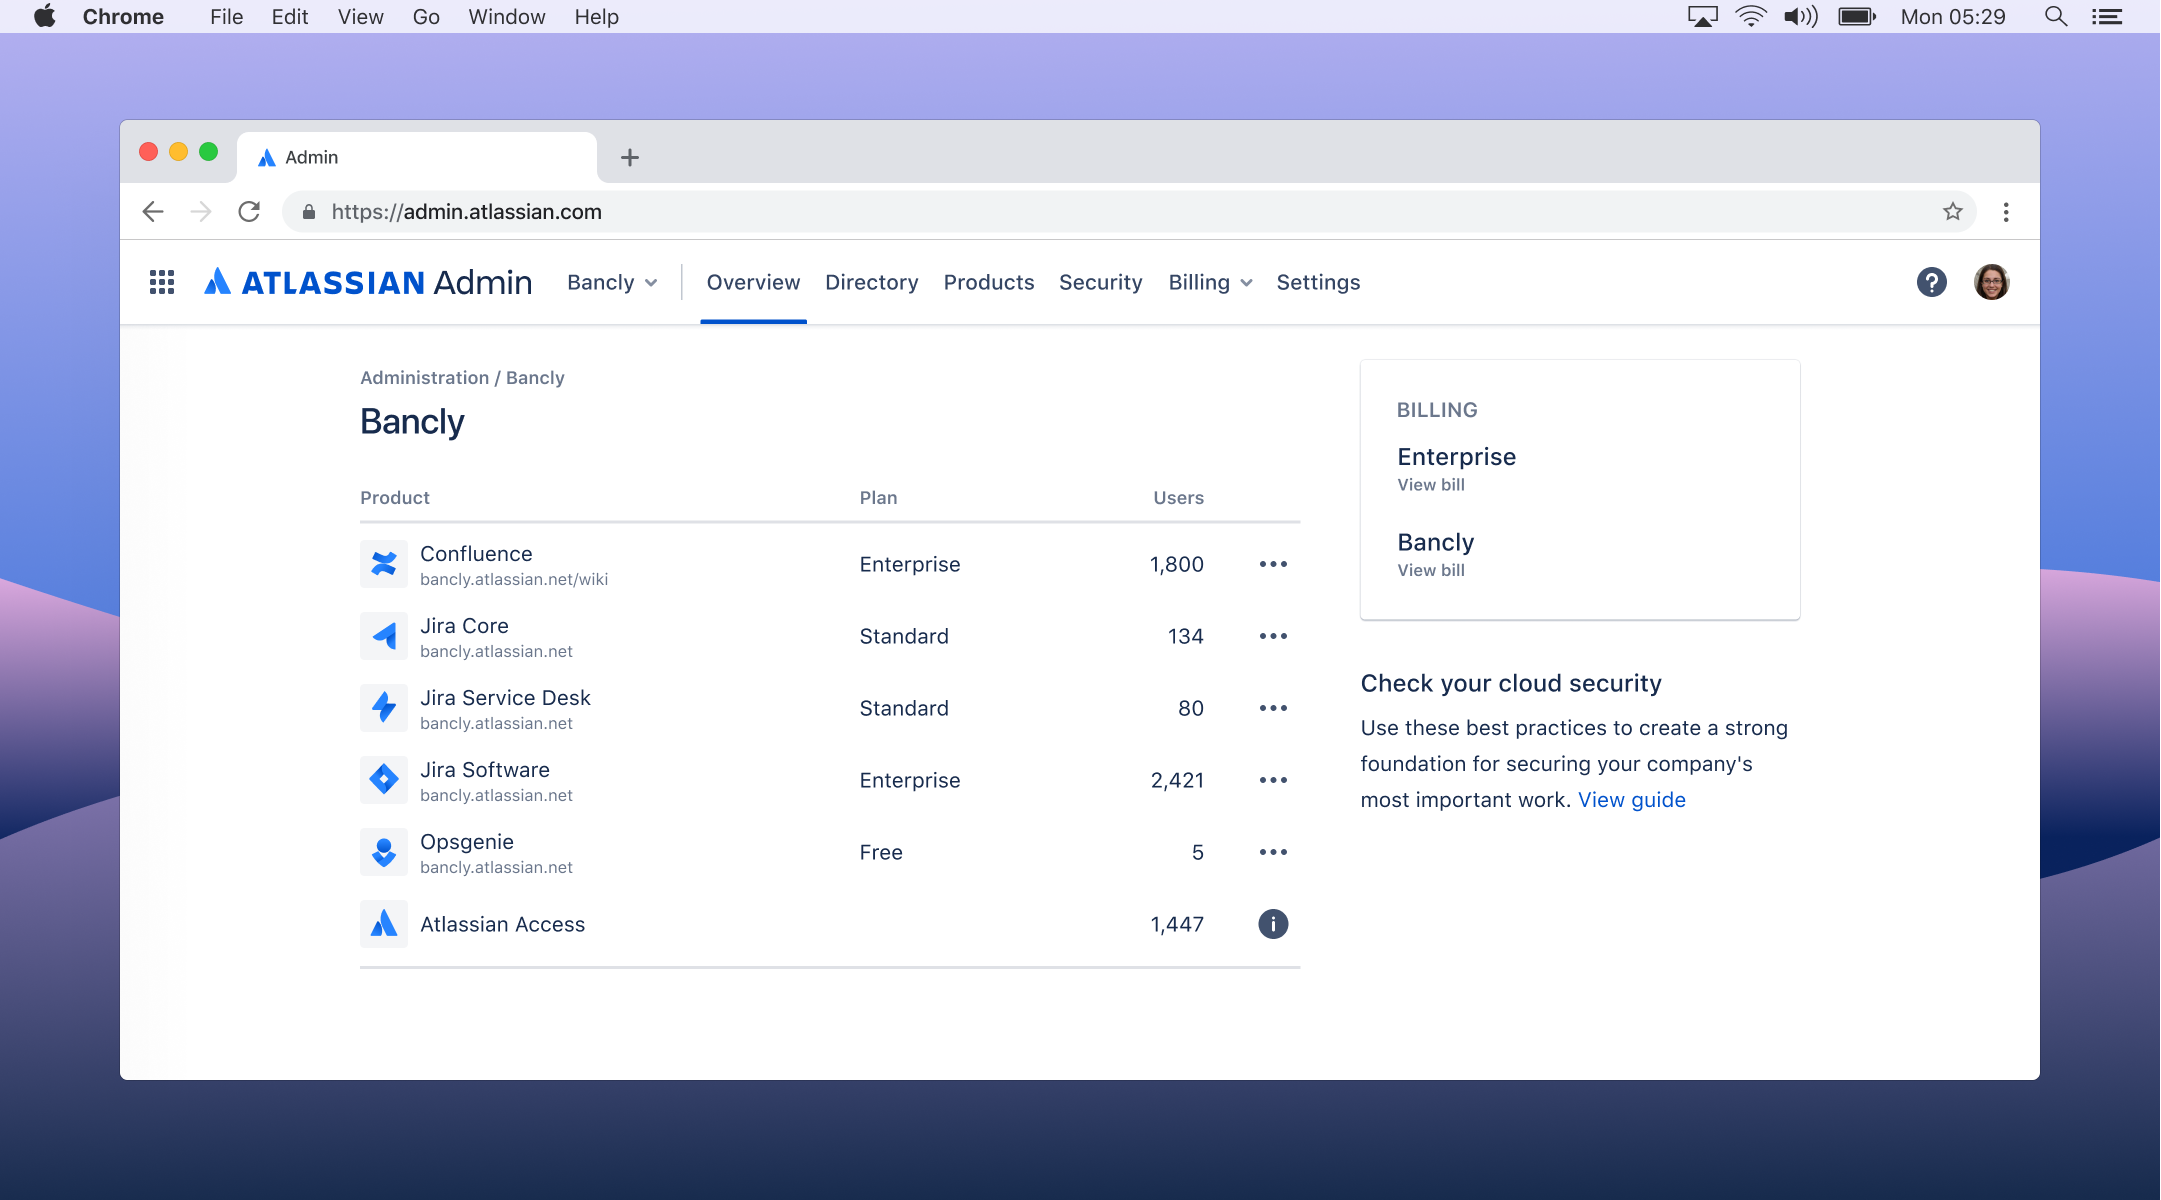 Shows the Atlassian Admin home screen with an organization overview